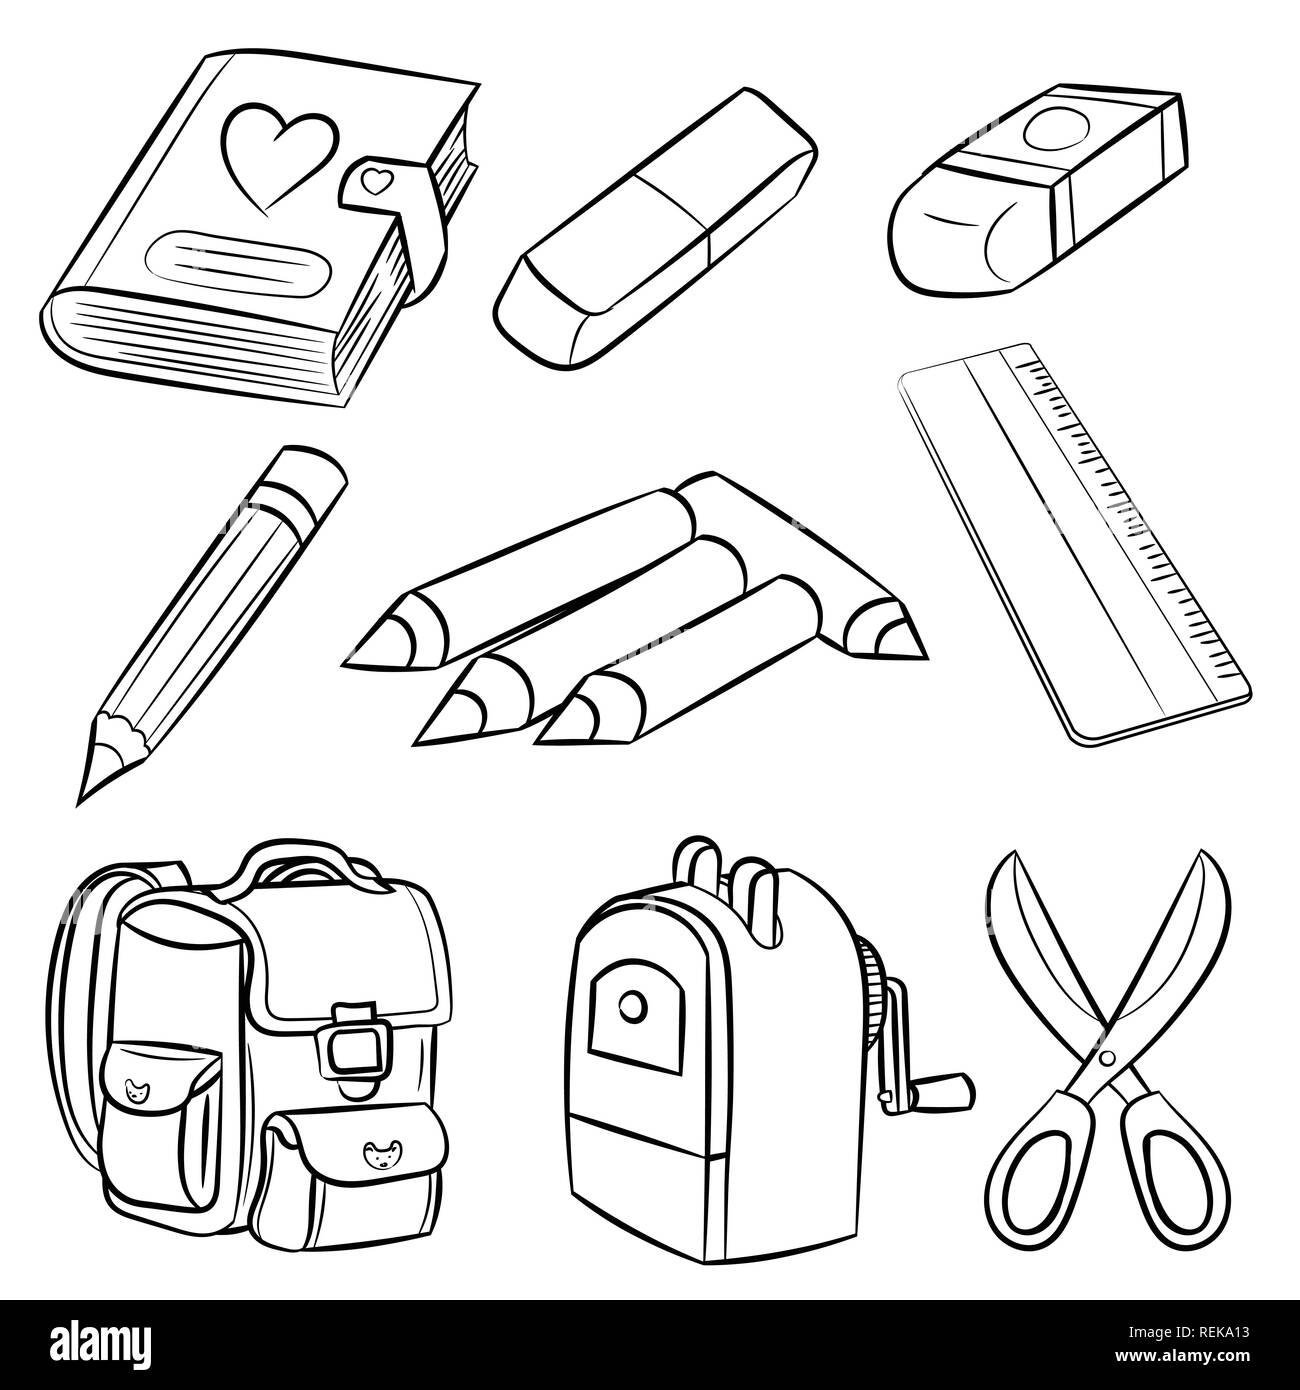 https://c8.alamy.com/comp/REKA13/welcome-back-to-school-classroom-supplies-set-for-coloring-book-education-concept-hand-drawn-vector-illustration-REKA13.jpg